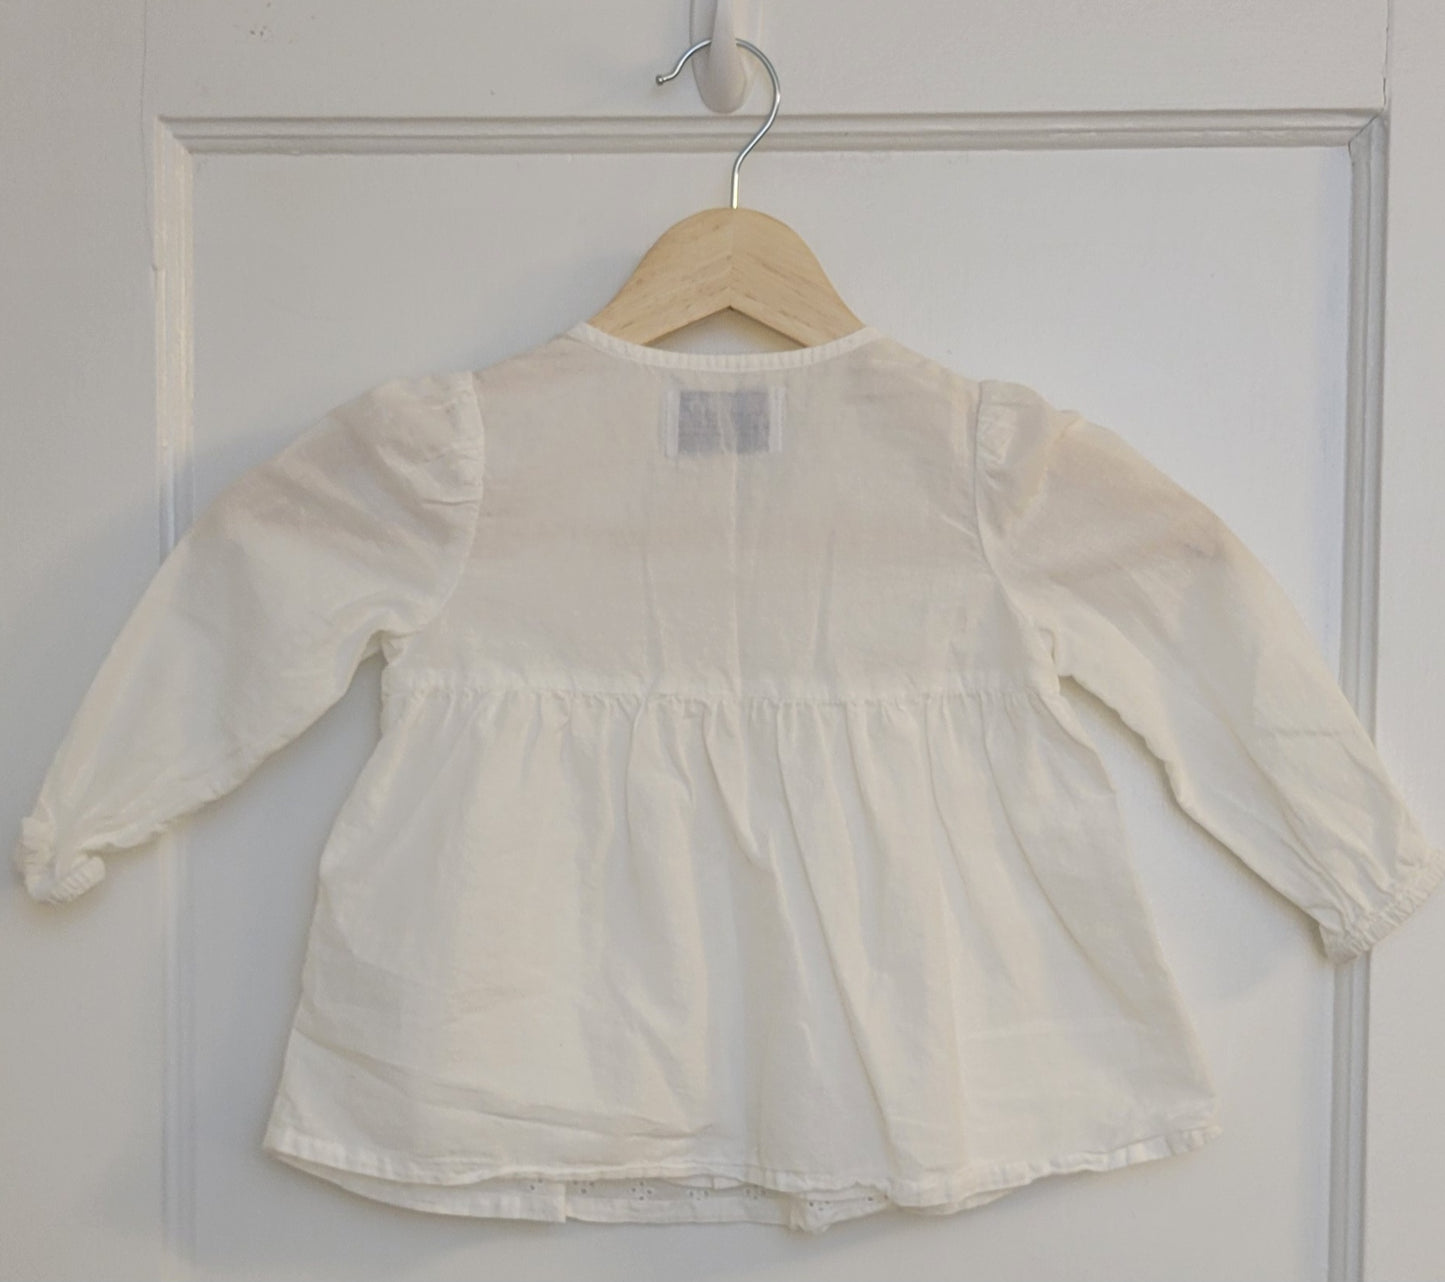 * Reduced * Old Navy White Long Sleeve Eyelet Top, Girl's Size 2T